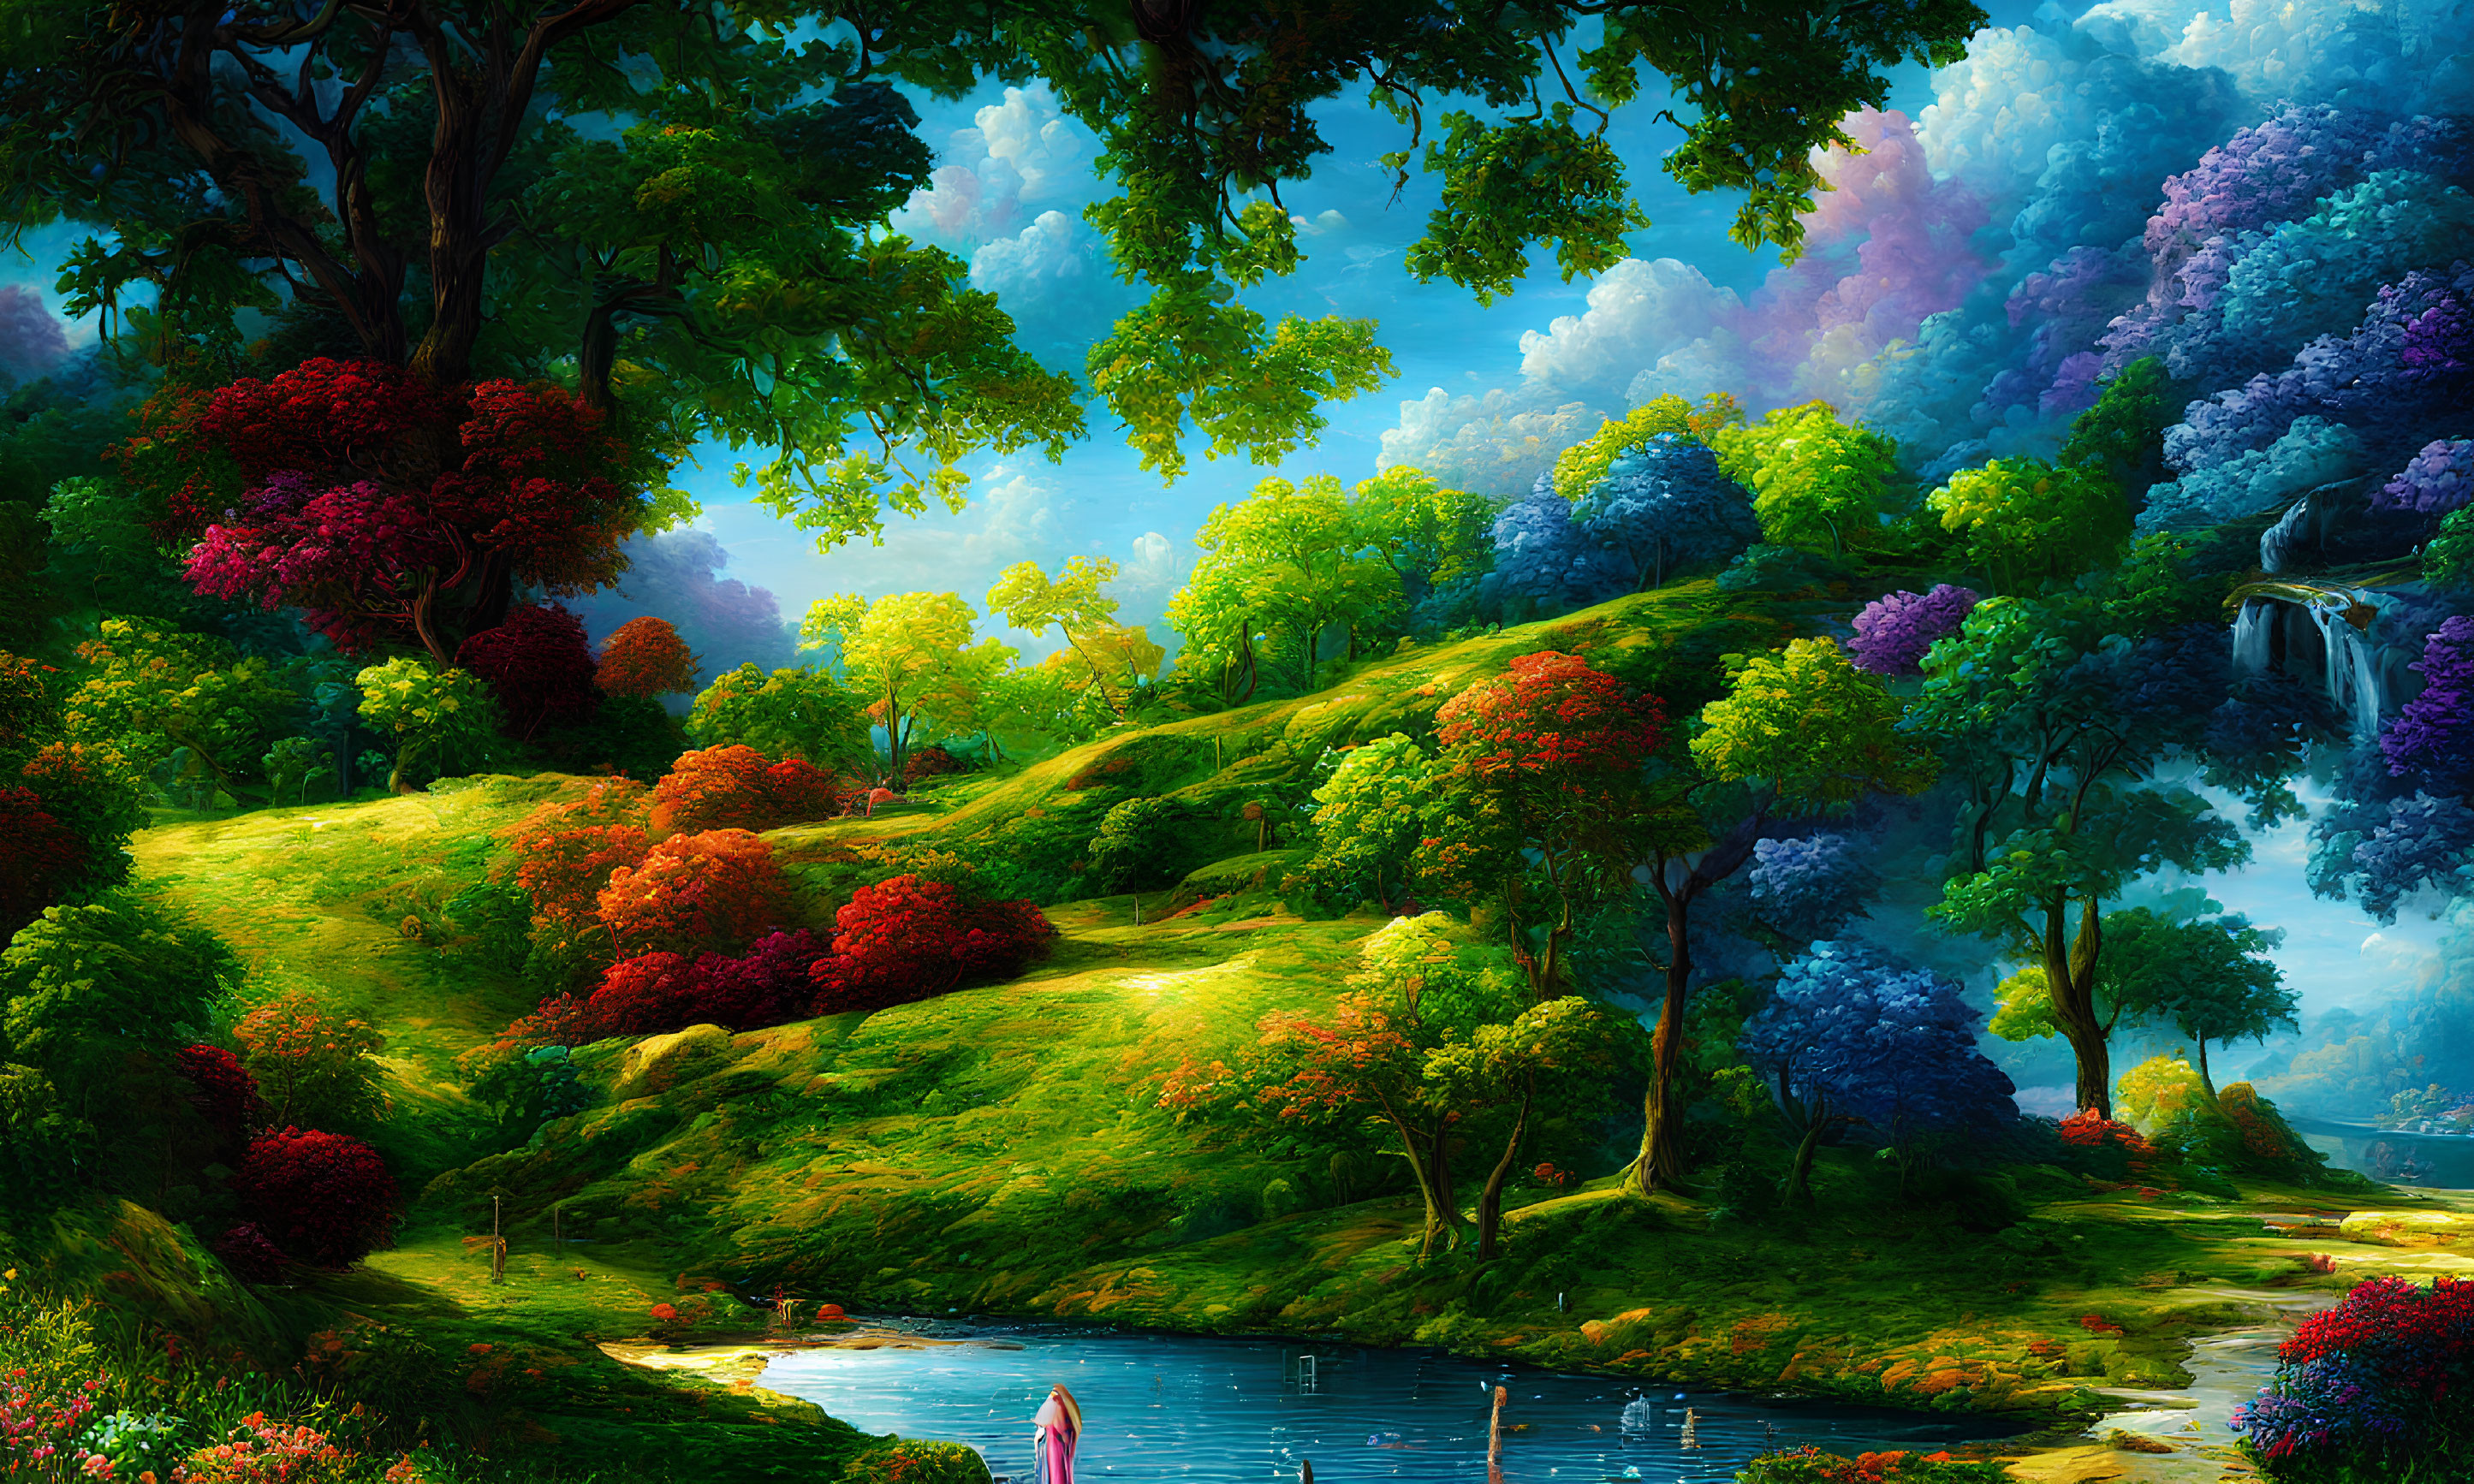 Colorful Landscape with Green Hills, Blue Pond, and Figure in Pink